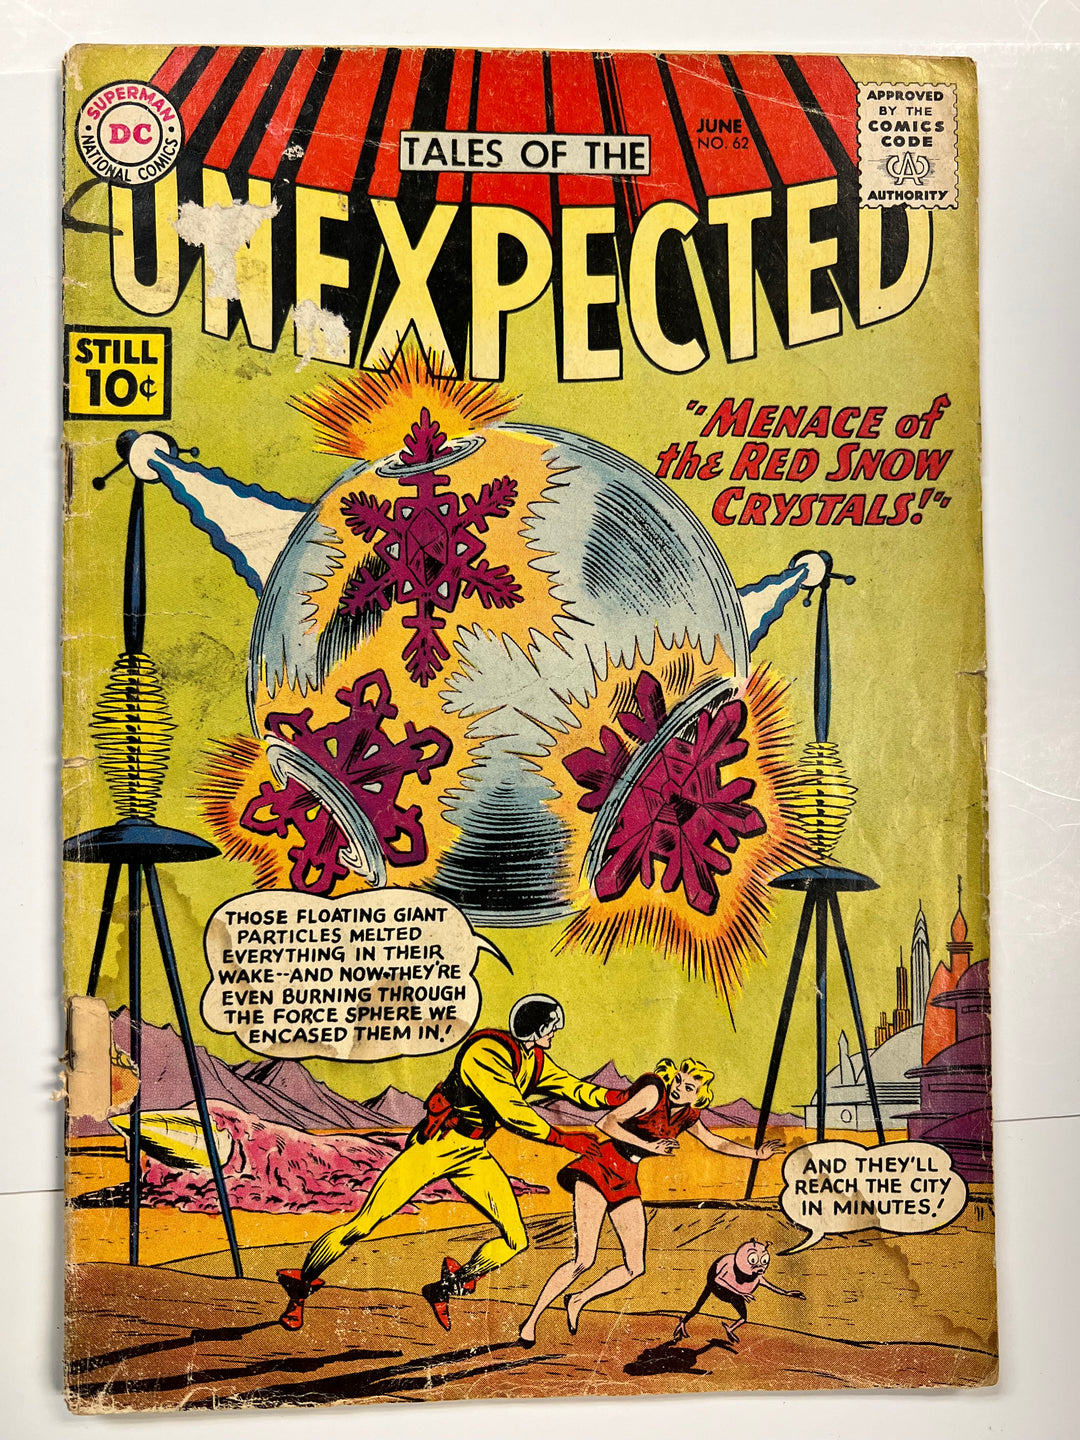 Tales of the Unexpected #62 DC 1961 FR